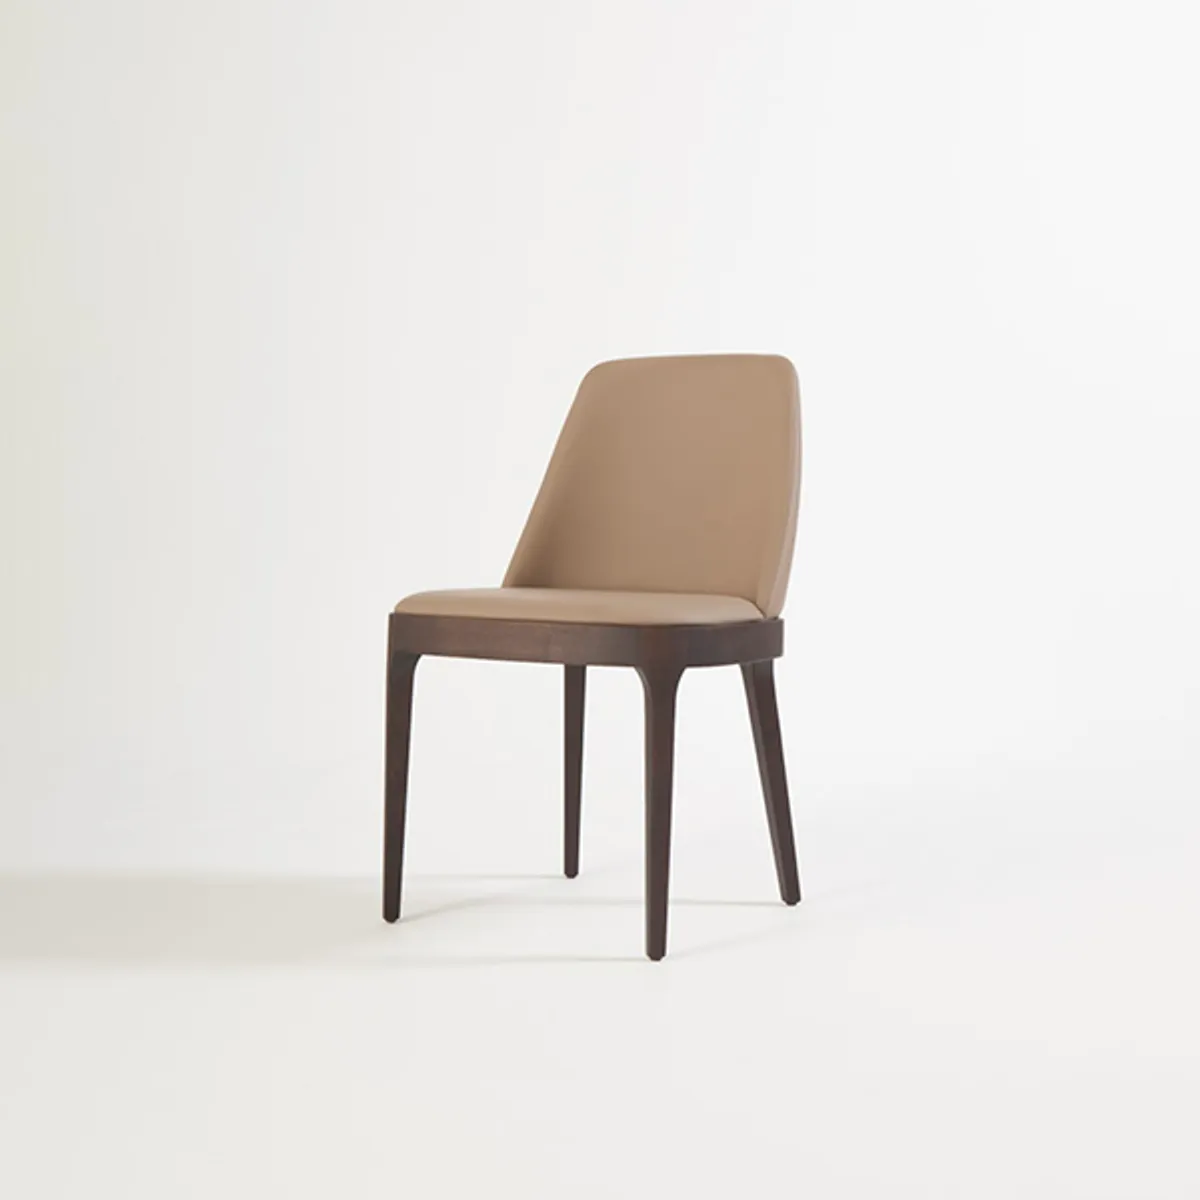 Candor Side Chair 8454 Inside Out Contracts